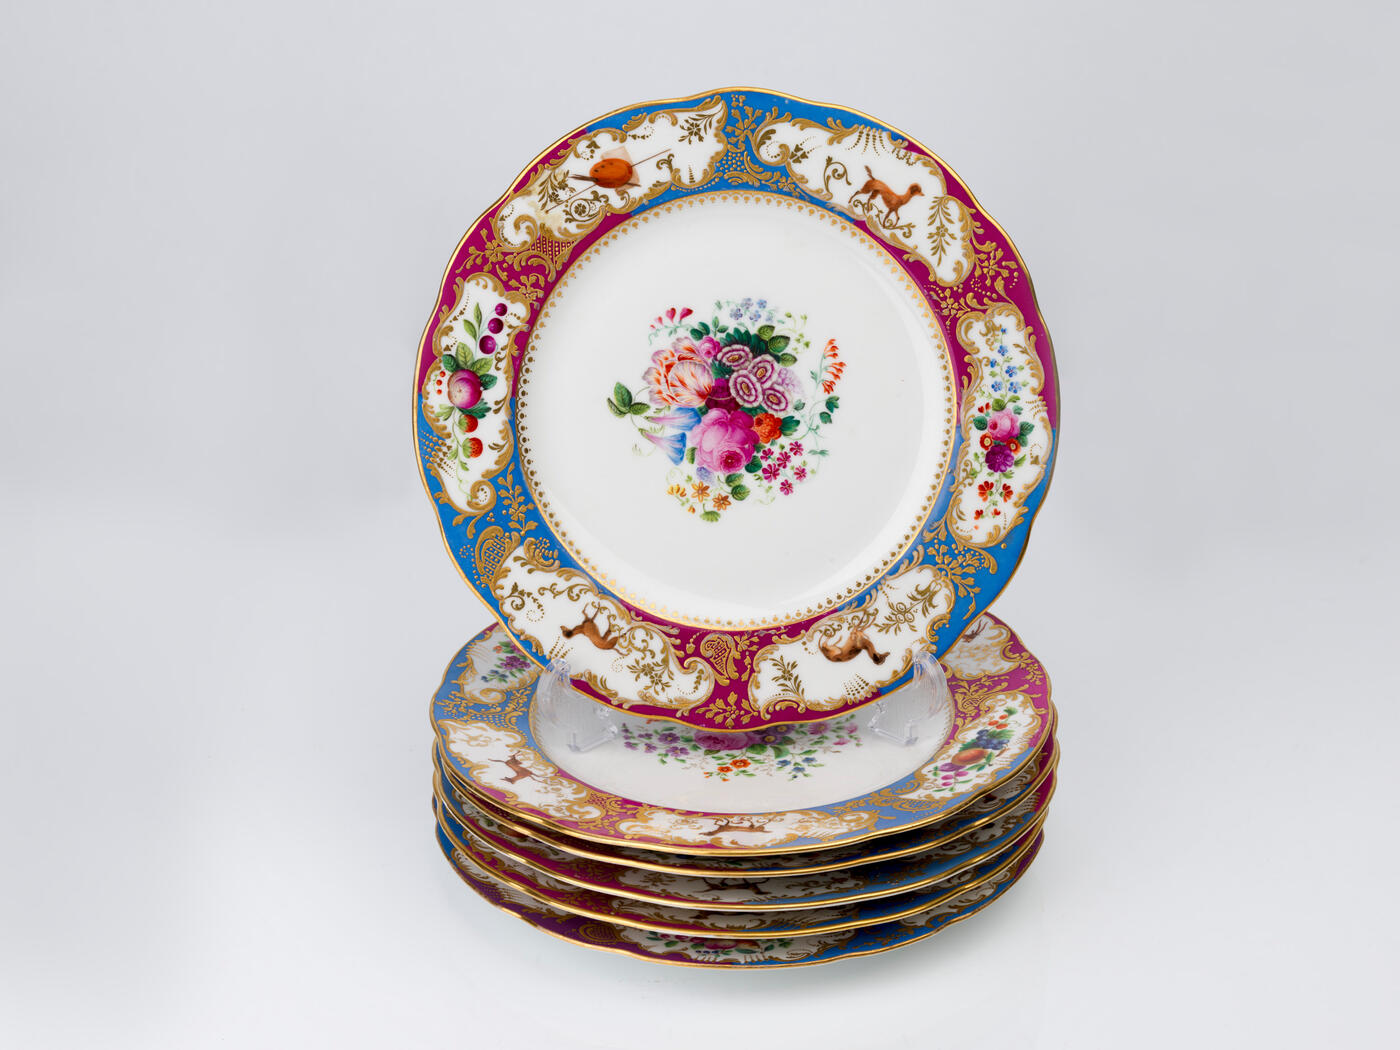 A Set of Six Dinner and Six Soup Plates from the Grand Duke Mikhail Pavlovich Service